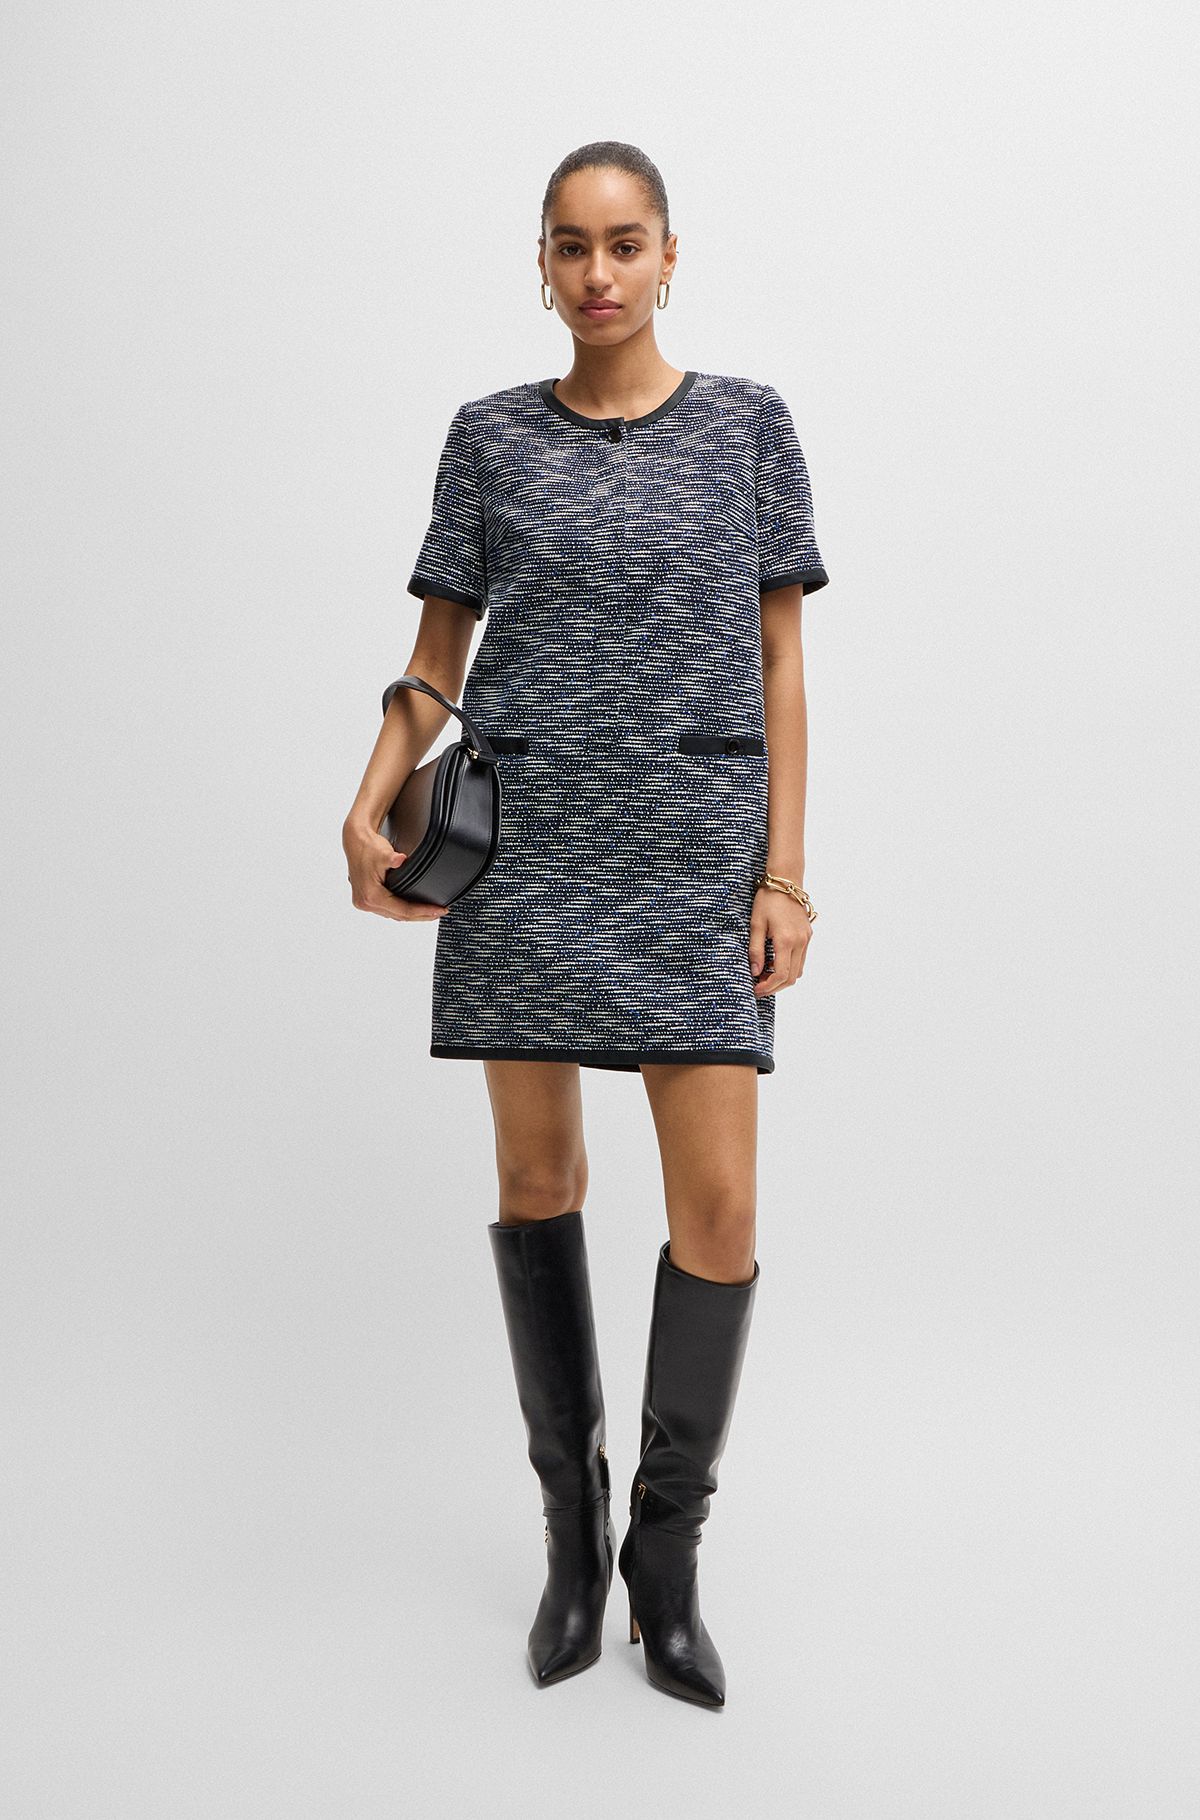 Relaxed-fit dress in cotton-blend tweed, Blue Patterned